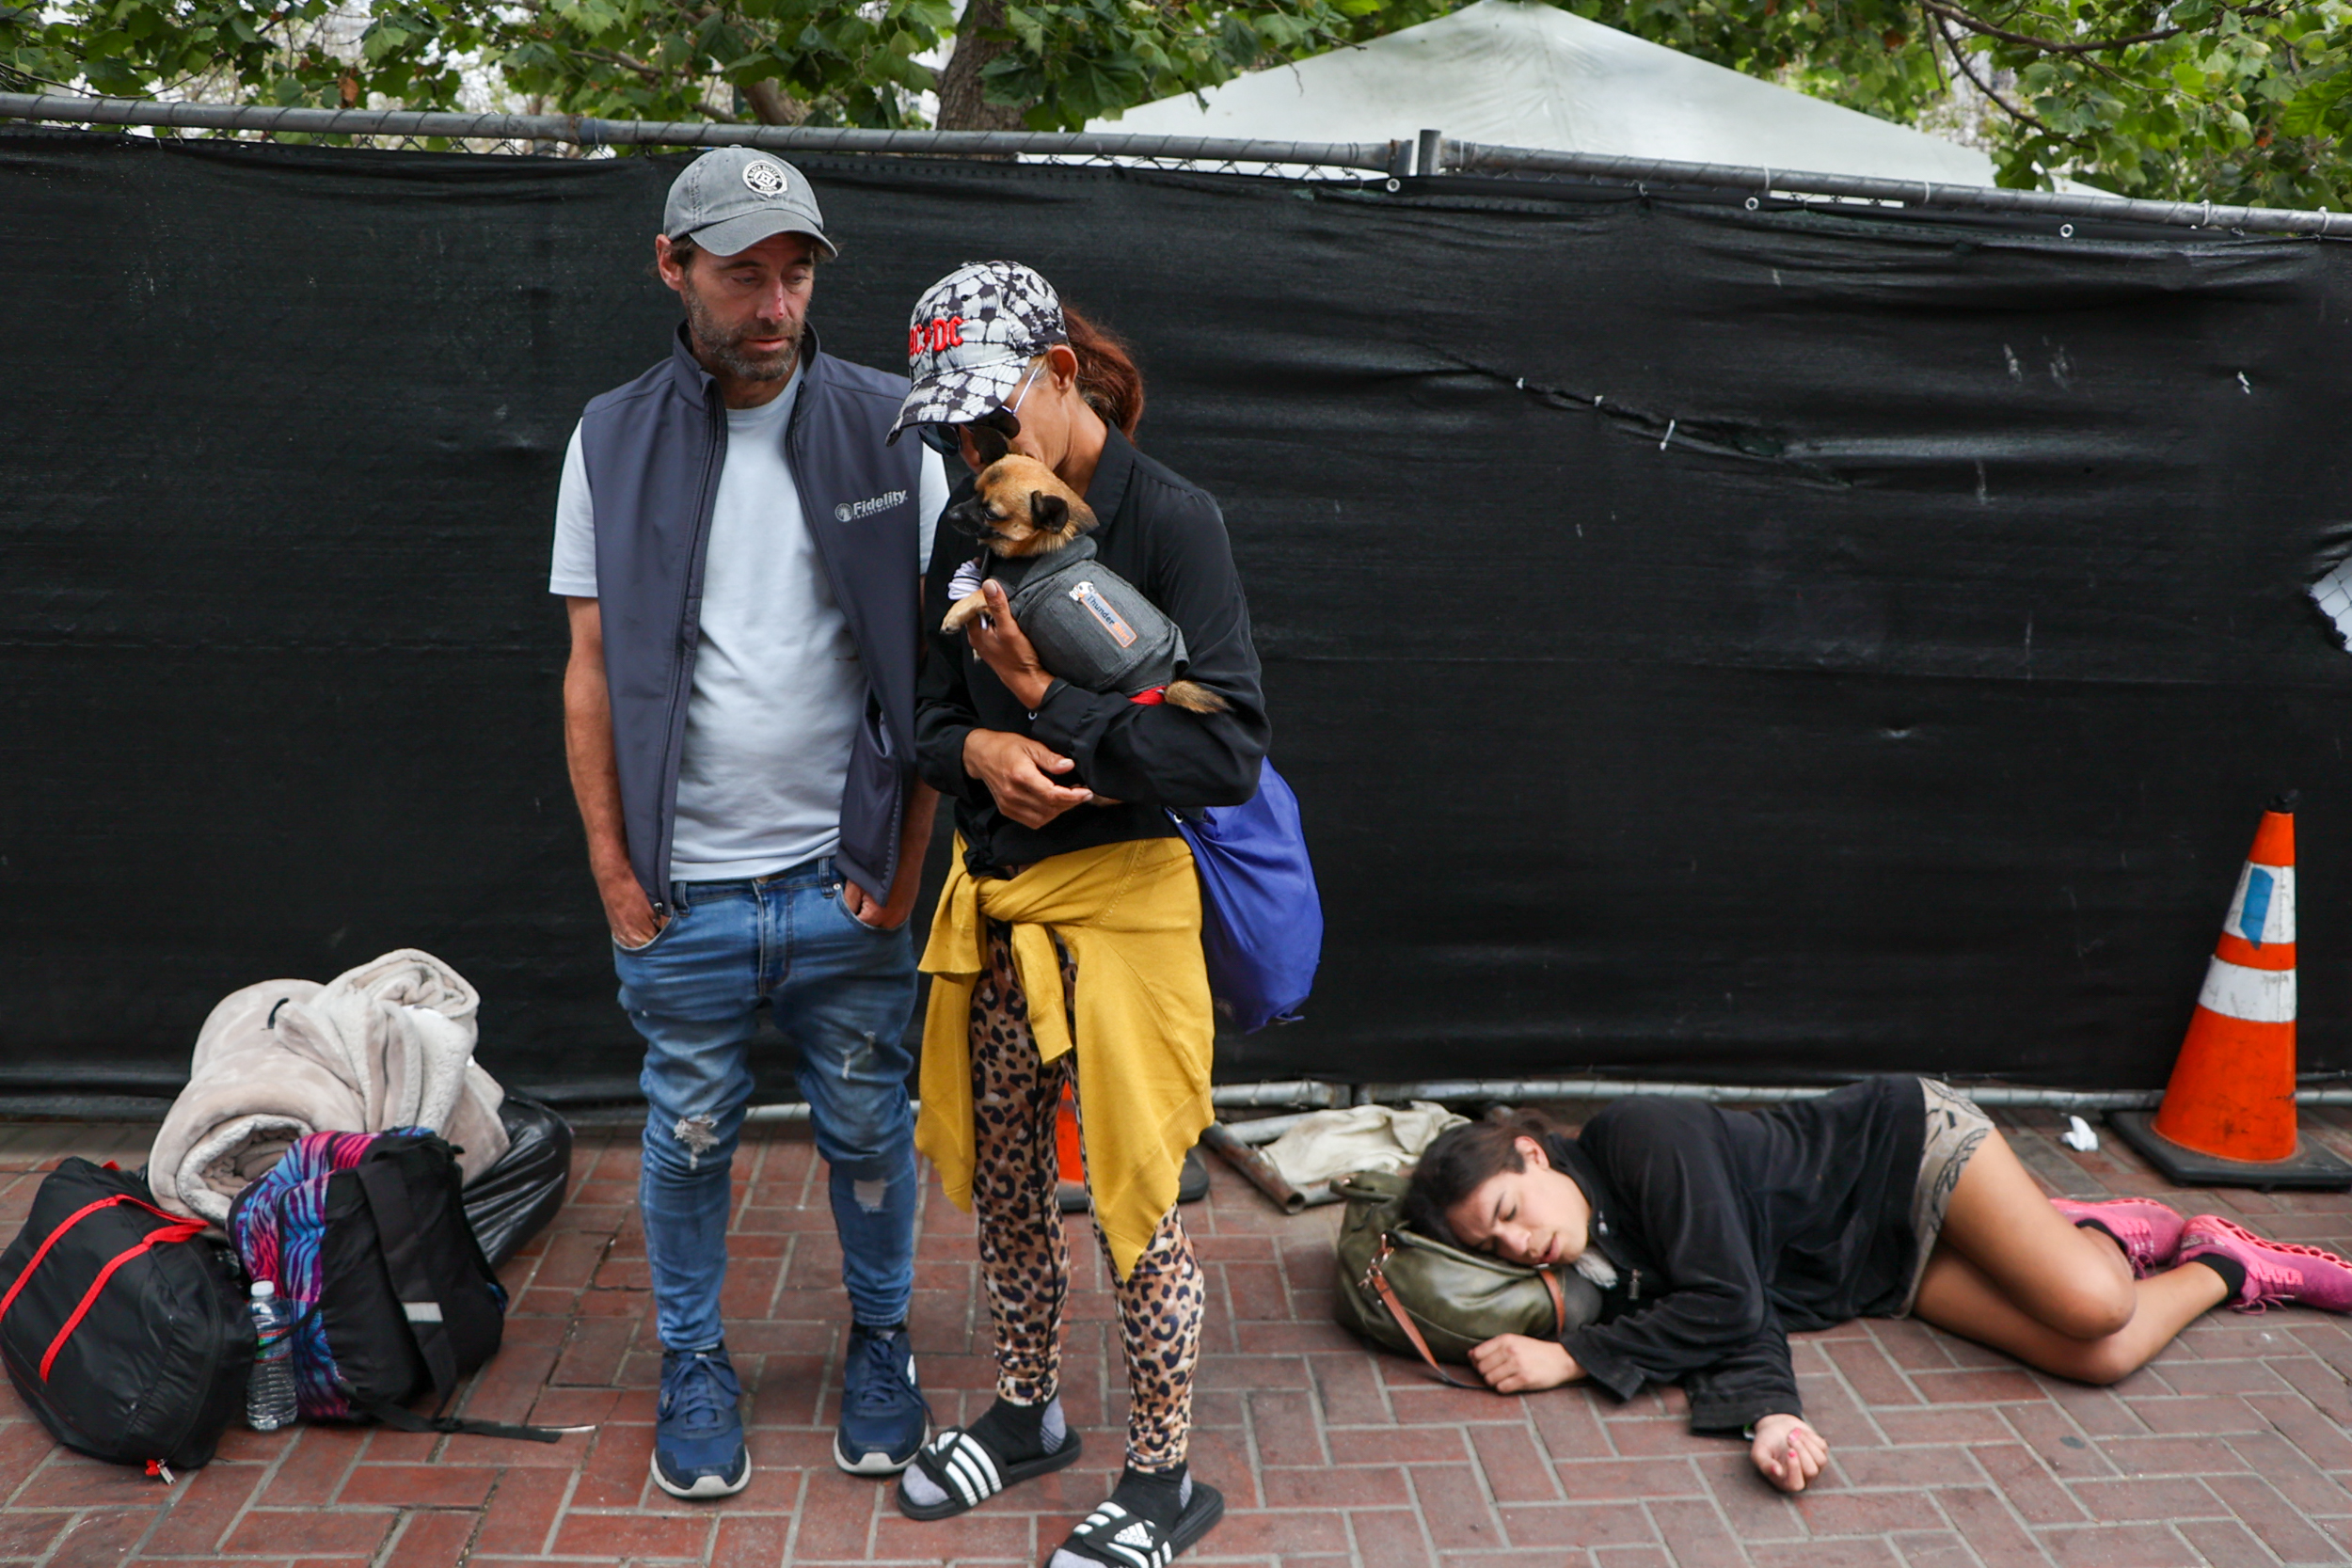 Two adults stand with a dog; a woman sleeps on the pavement nearby, with bags and a cone visible.